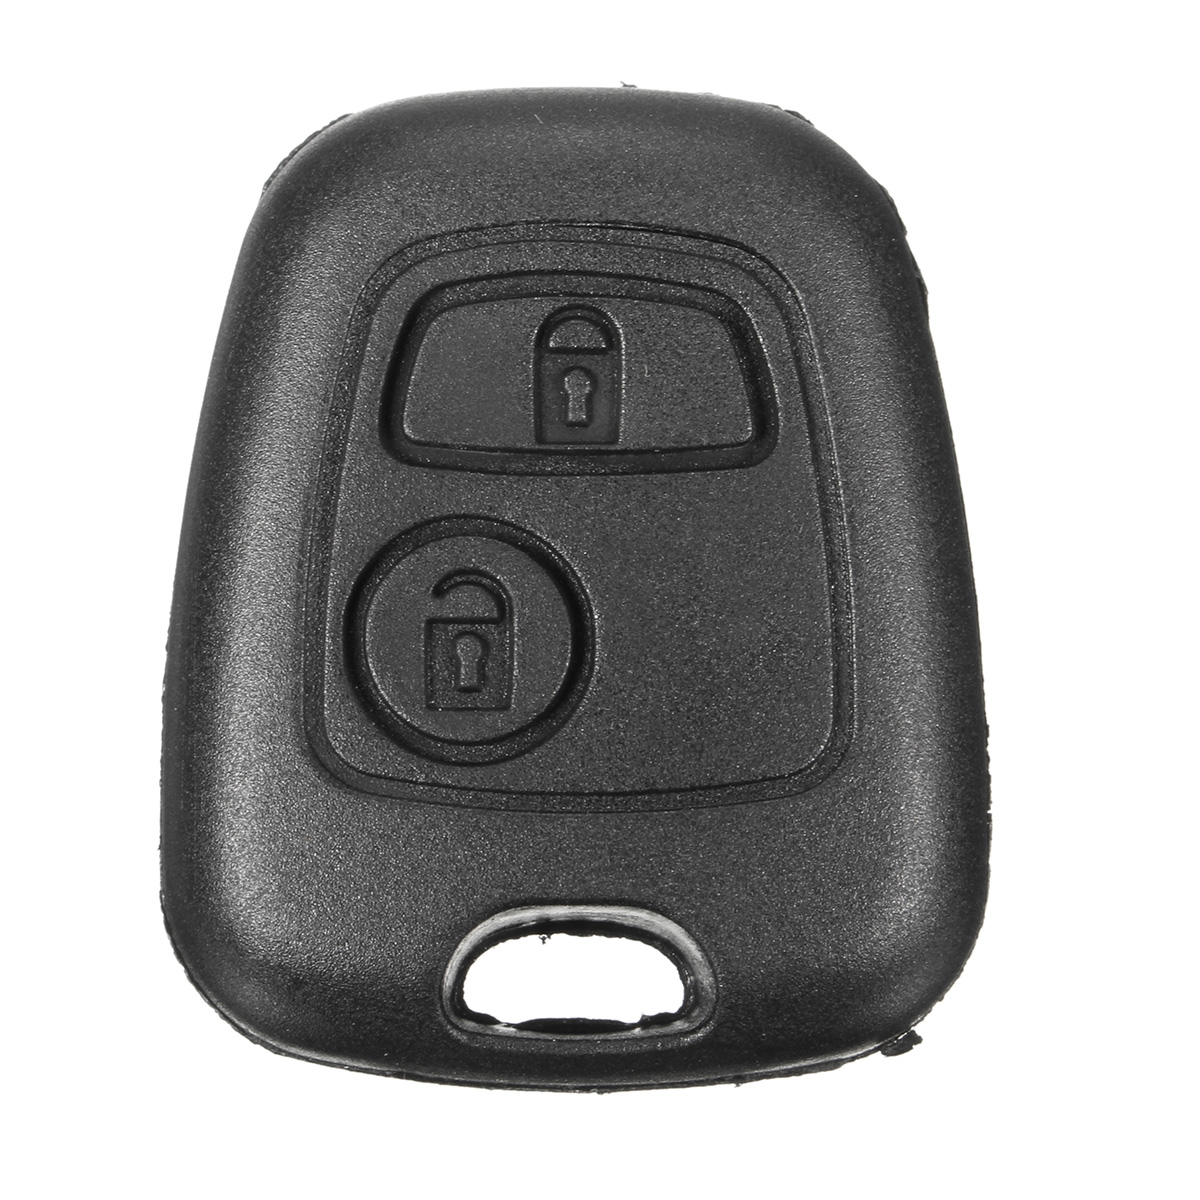 

New 2 Button Smart Remote Key Fob Case Shell For Peugeot 106 107 206 207 307 405 406 806